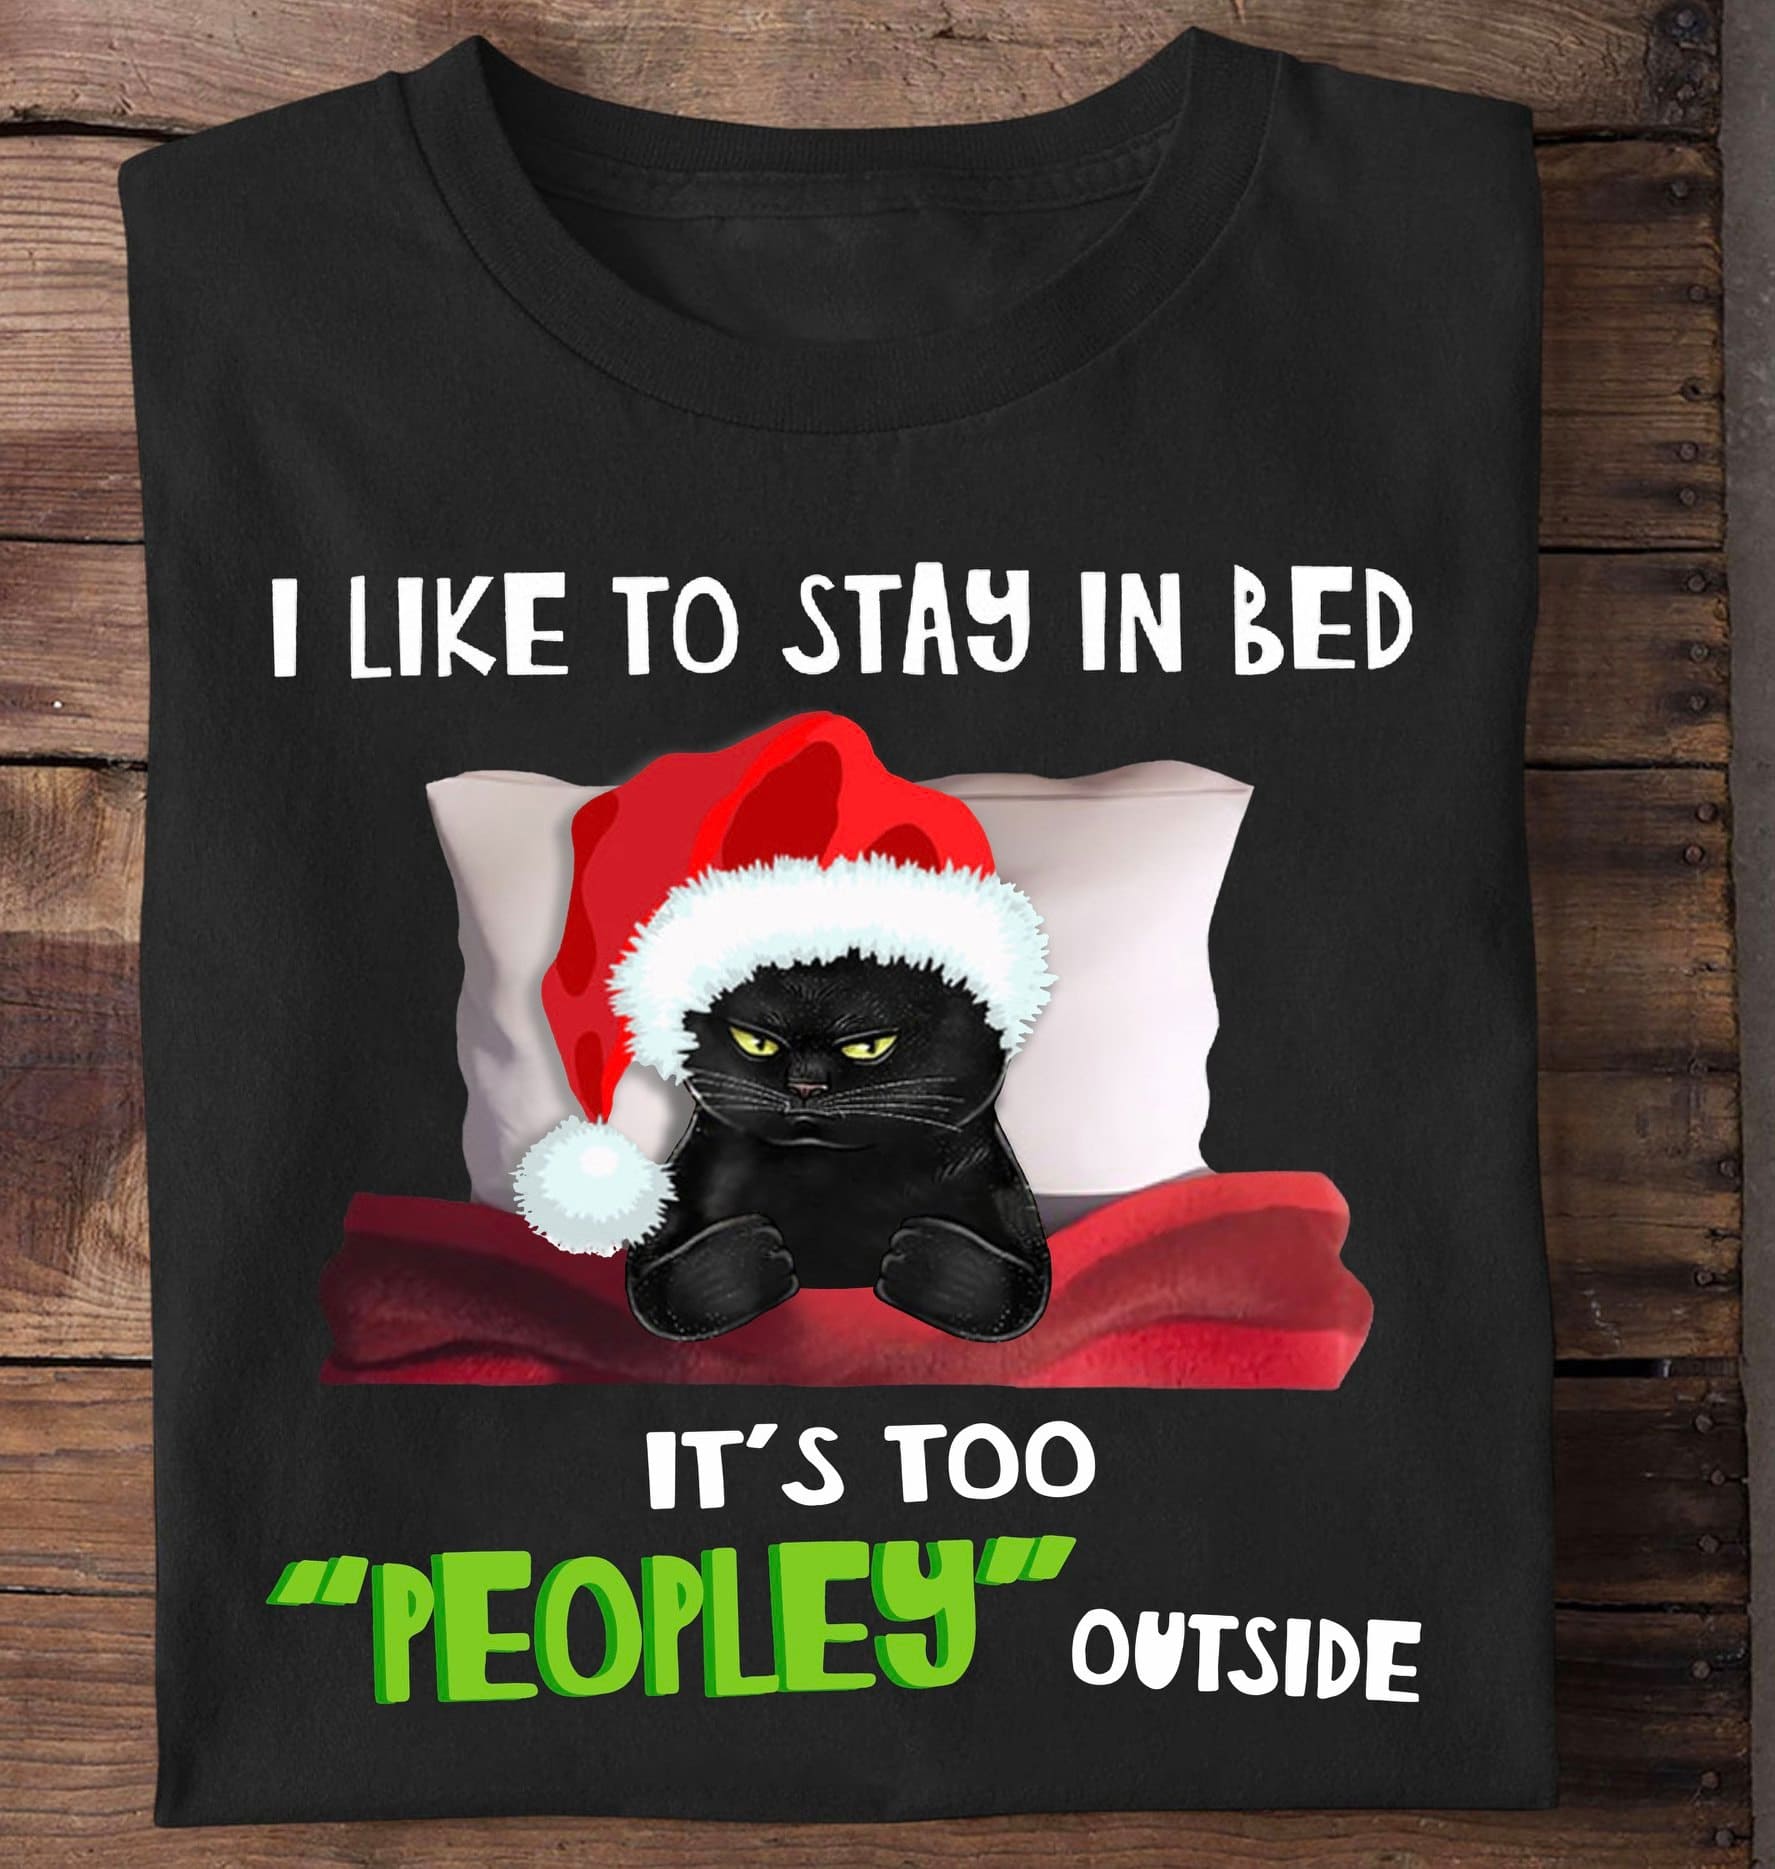 I like to stay in bed It's too peopley outside - Anti social lifestyle, Stay in bed Christmas